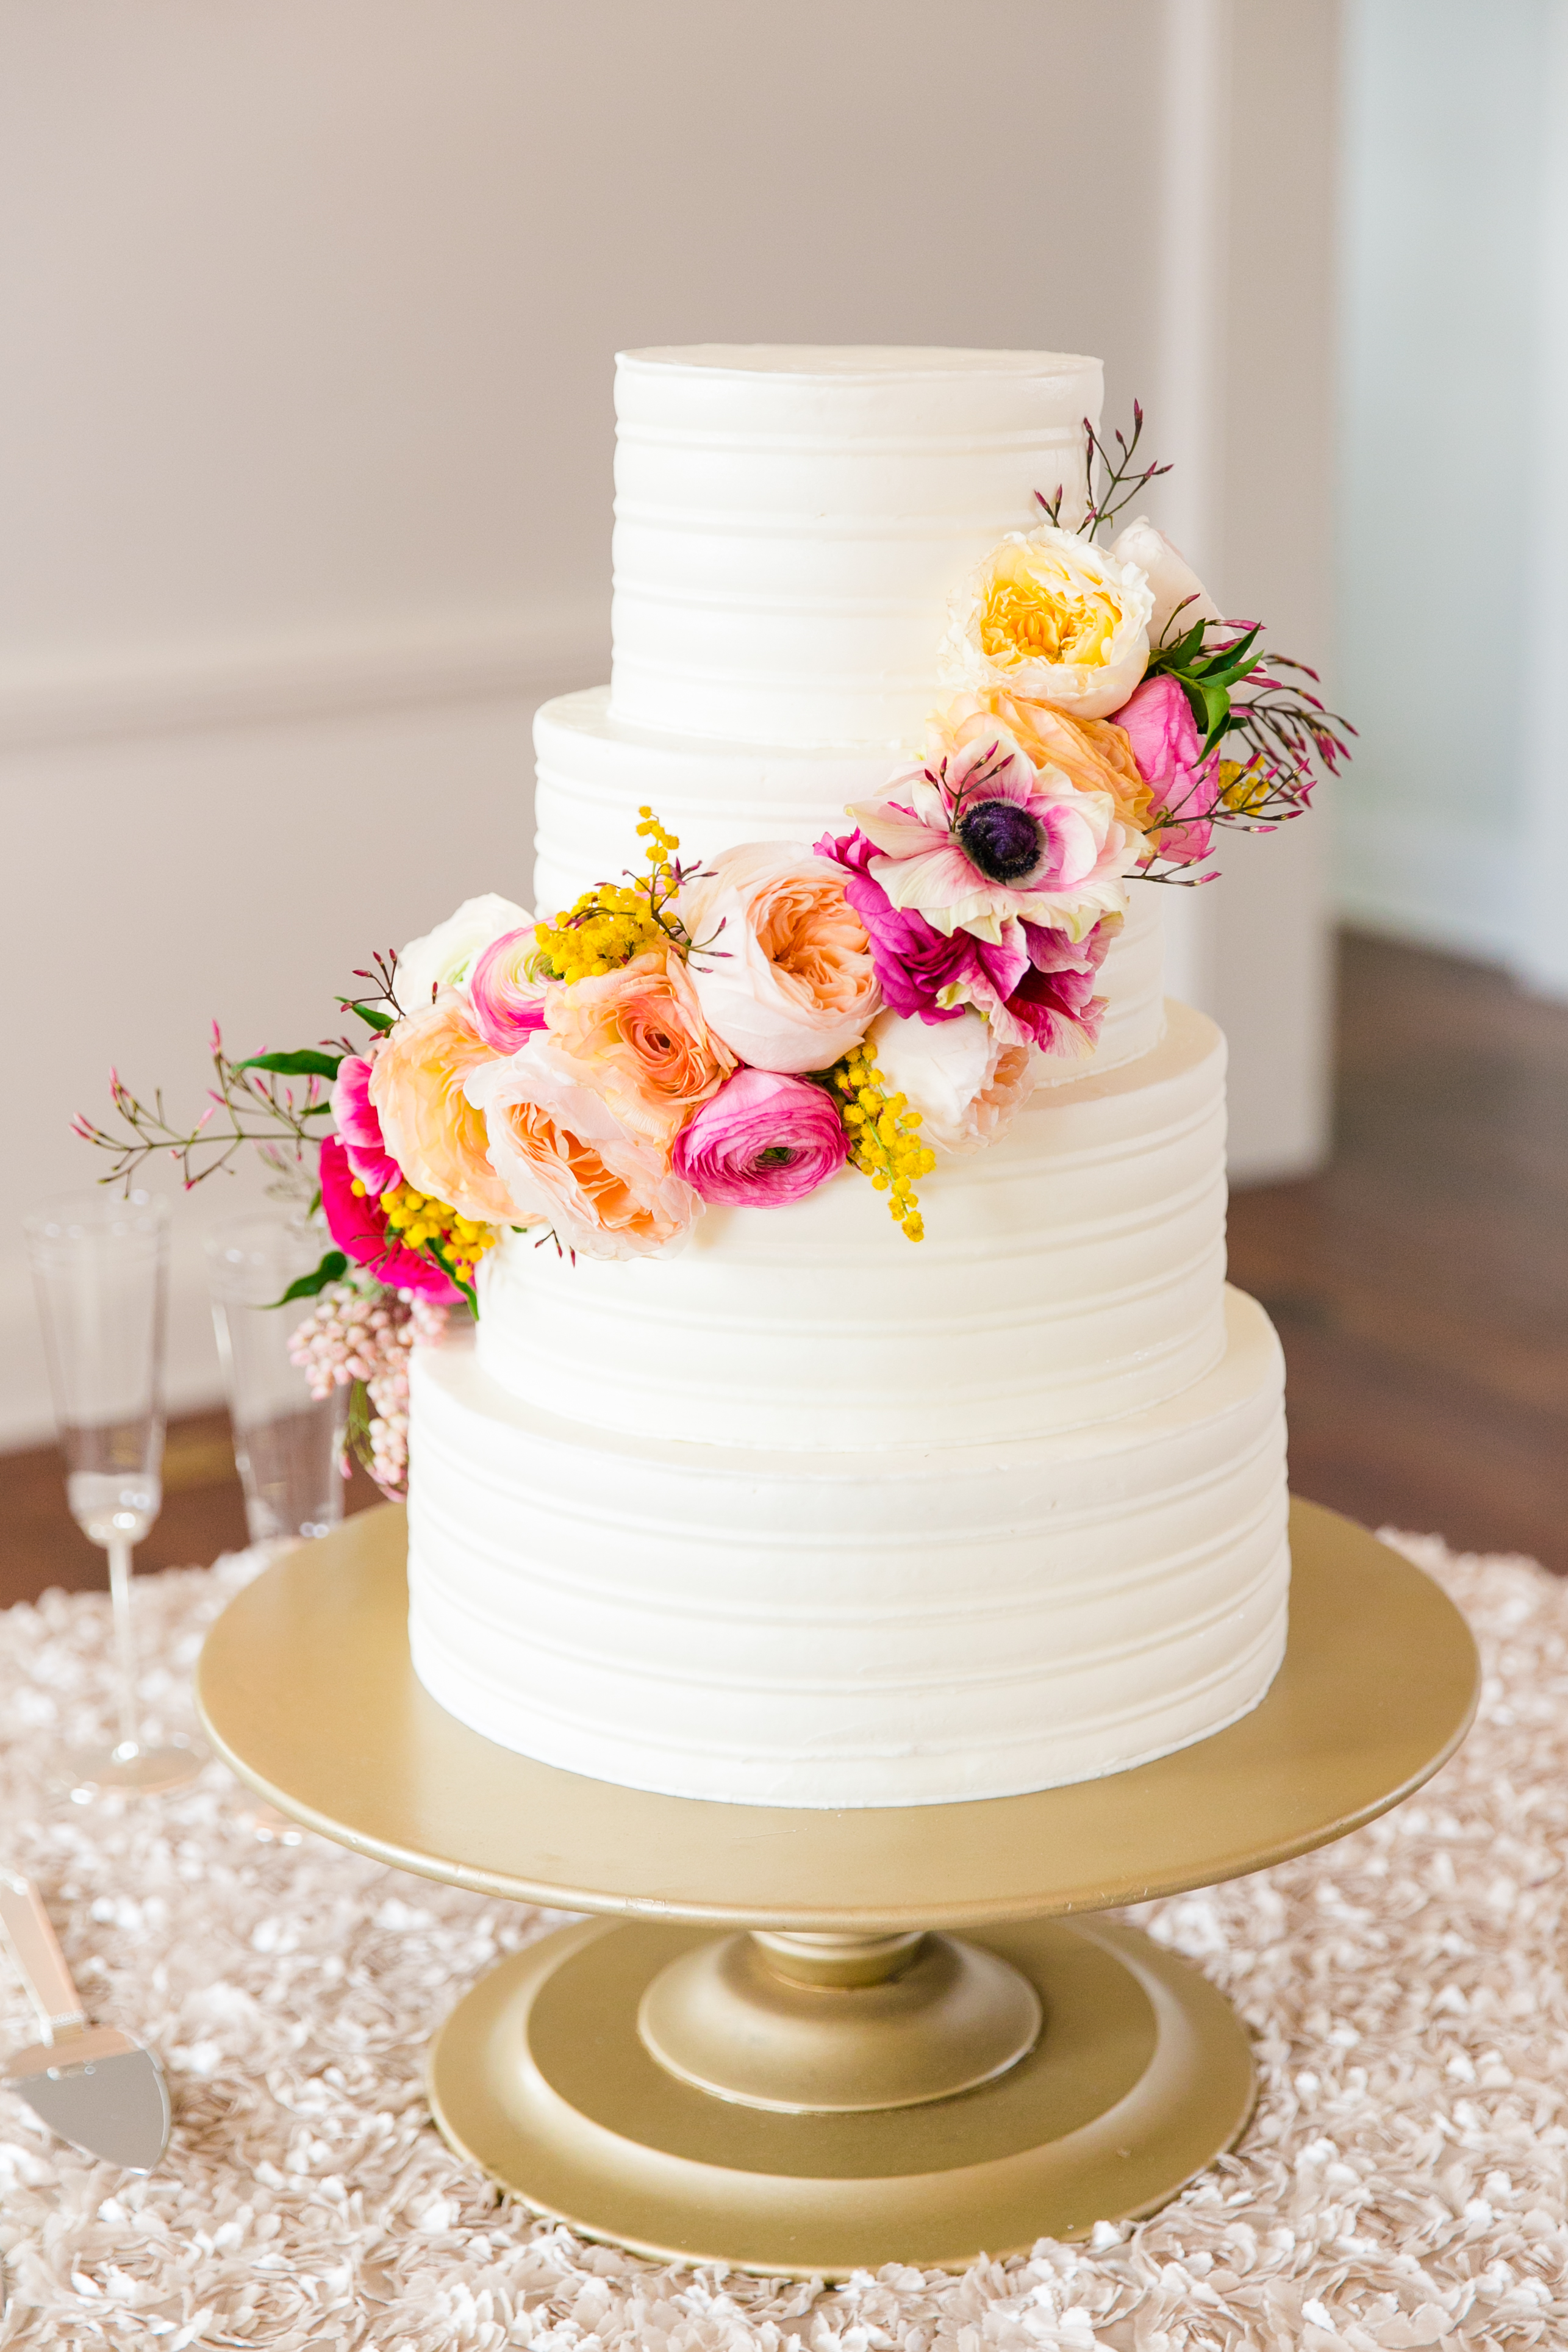 Spring Wedding Cakes That Are Almost Too Pretty to Eat ...